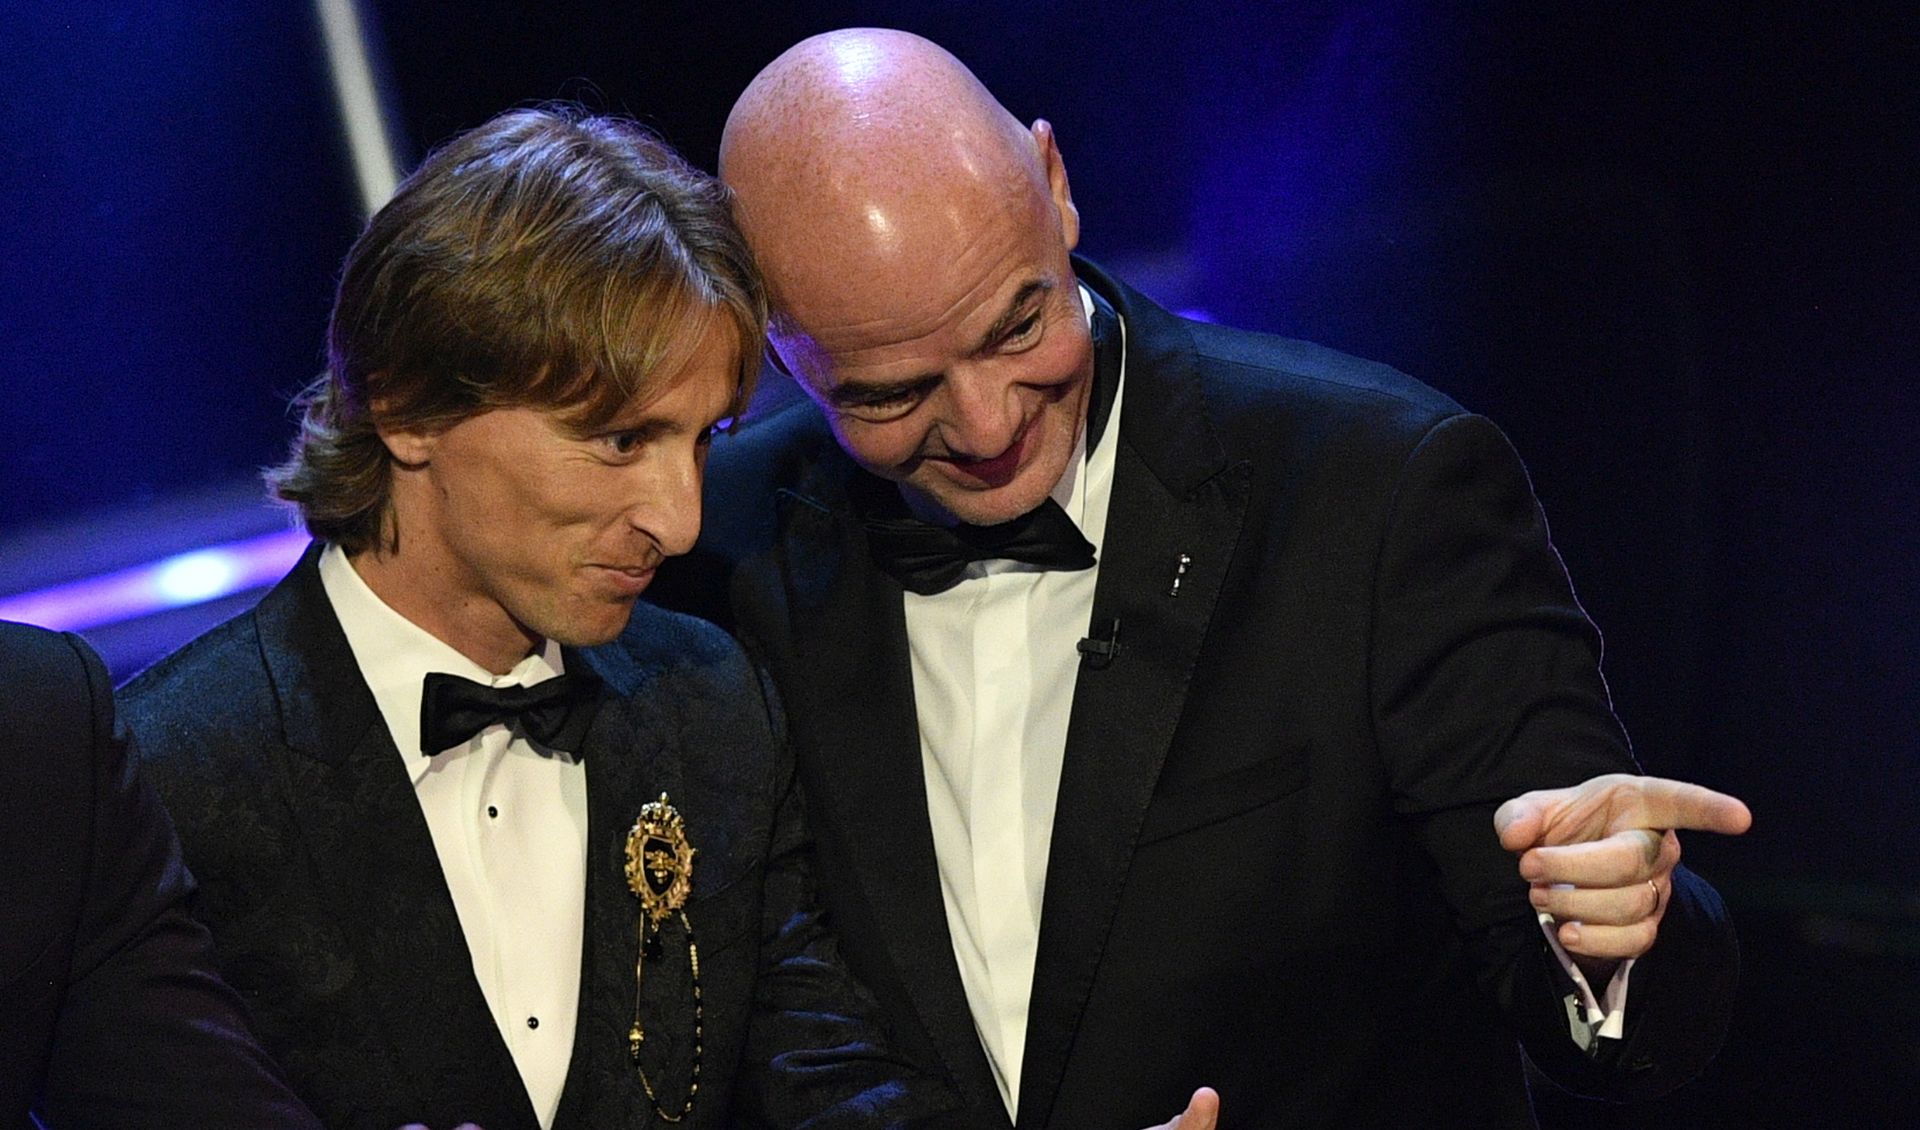 epa07044181 Real Madrid player Luka Modric (L) receives the Best FIFA Men's Player award from FIFA president Gianni Infantino during the Best FIFA Football Awards 2018 in London, Great Britain, 24 September 2018.  EPA/NEIL HALL